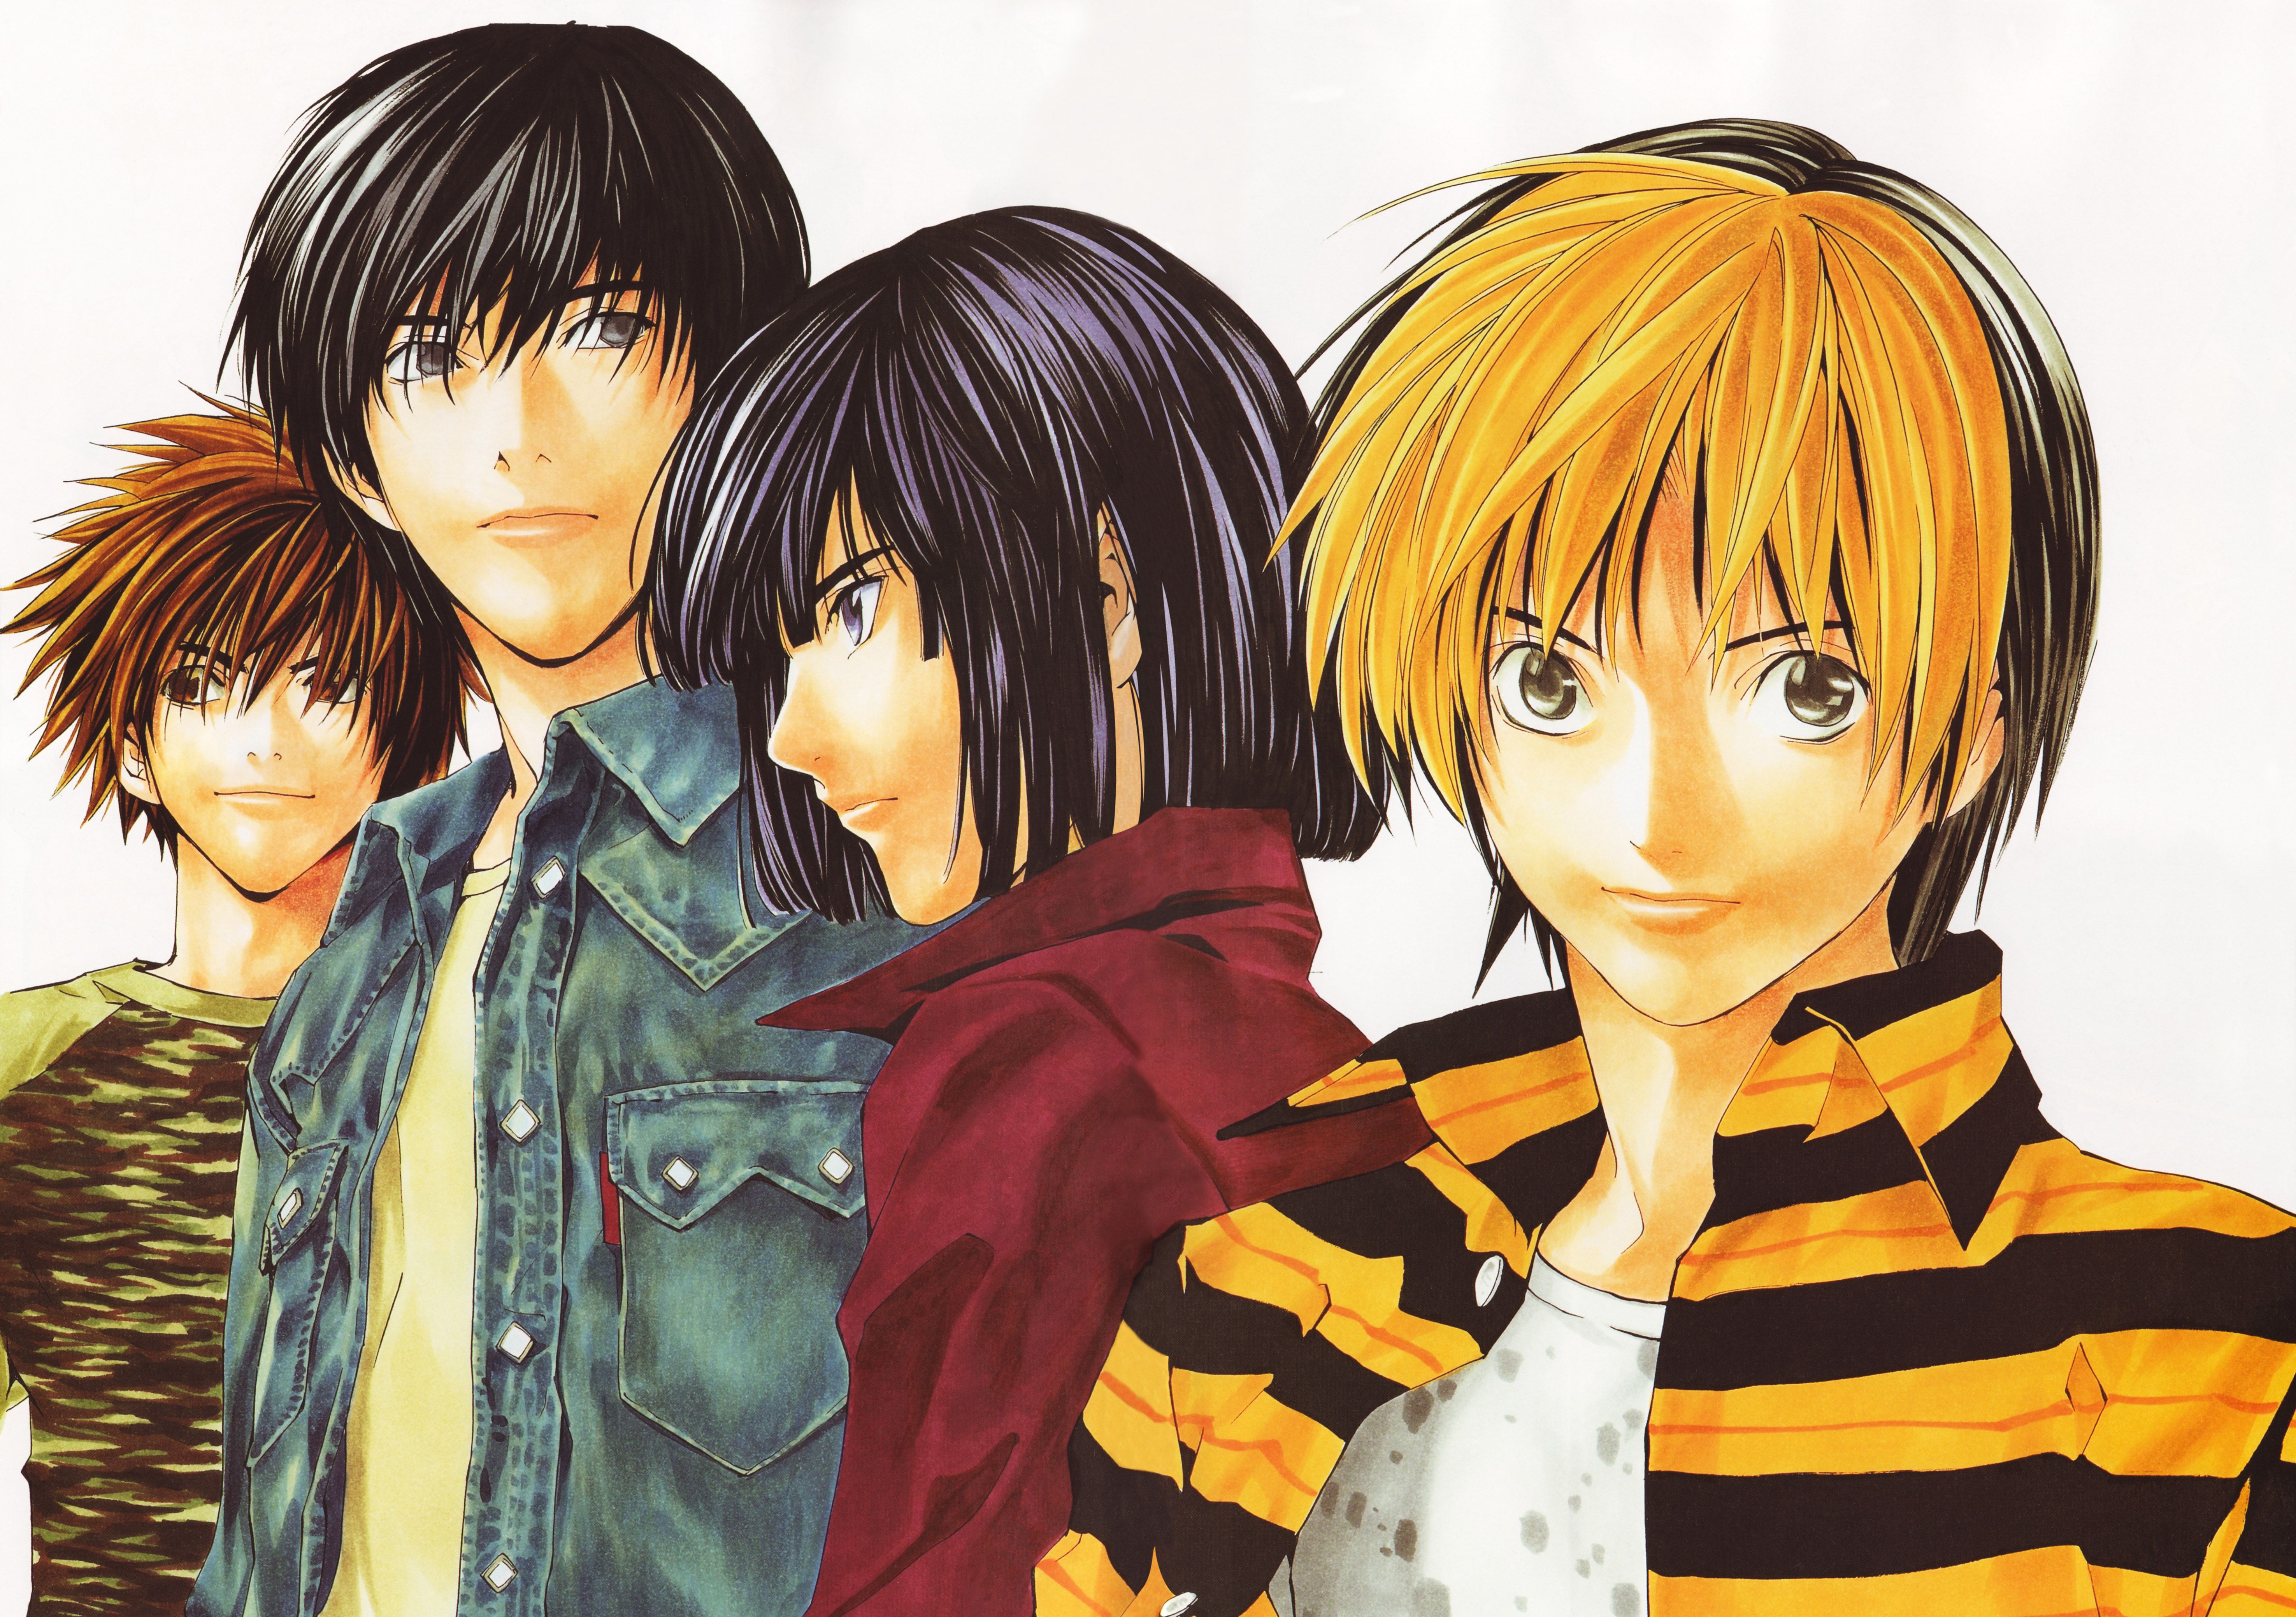 Hikaru No Go wallpapers for desktop, download free Hikaru No Go pictures  and backgrounds for PC